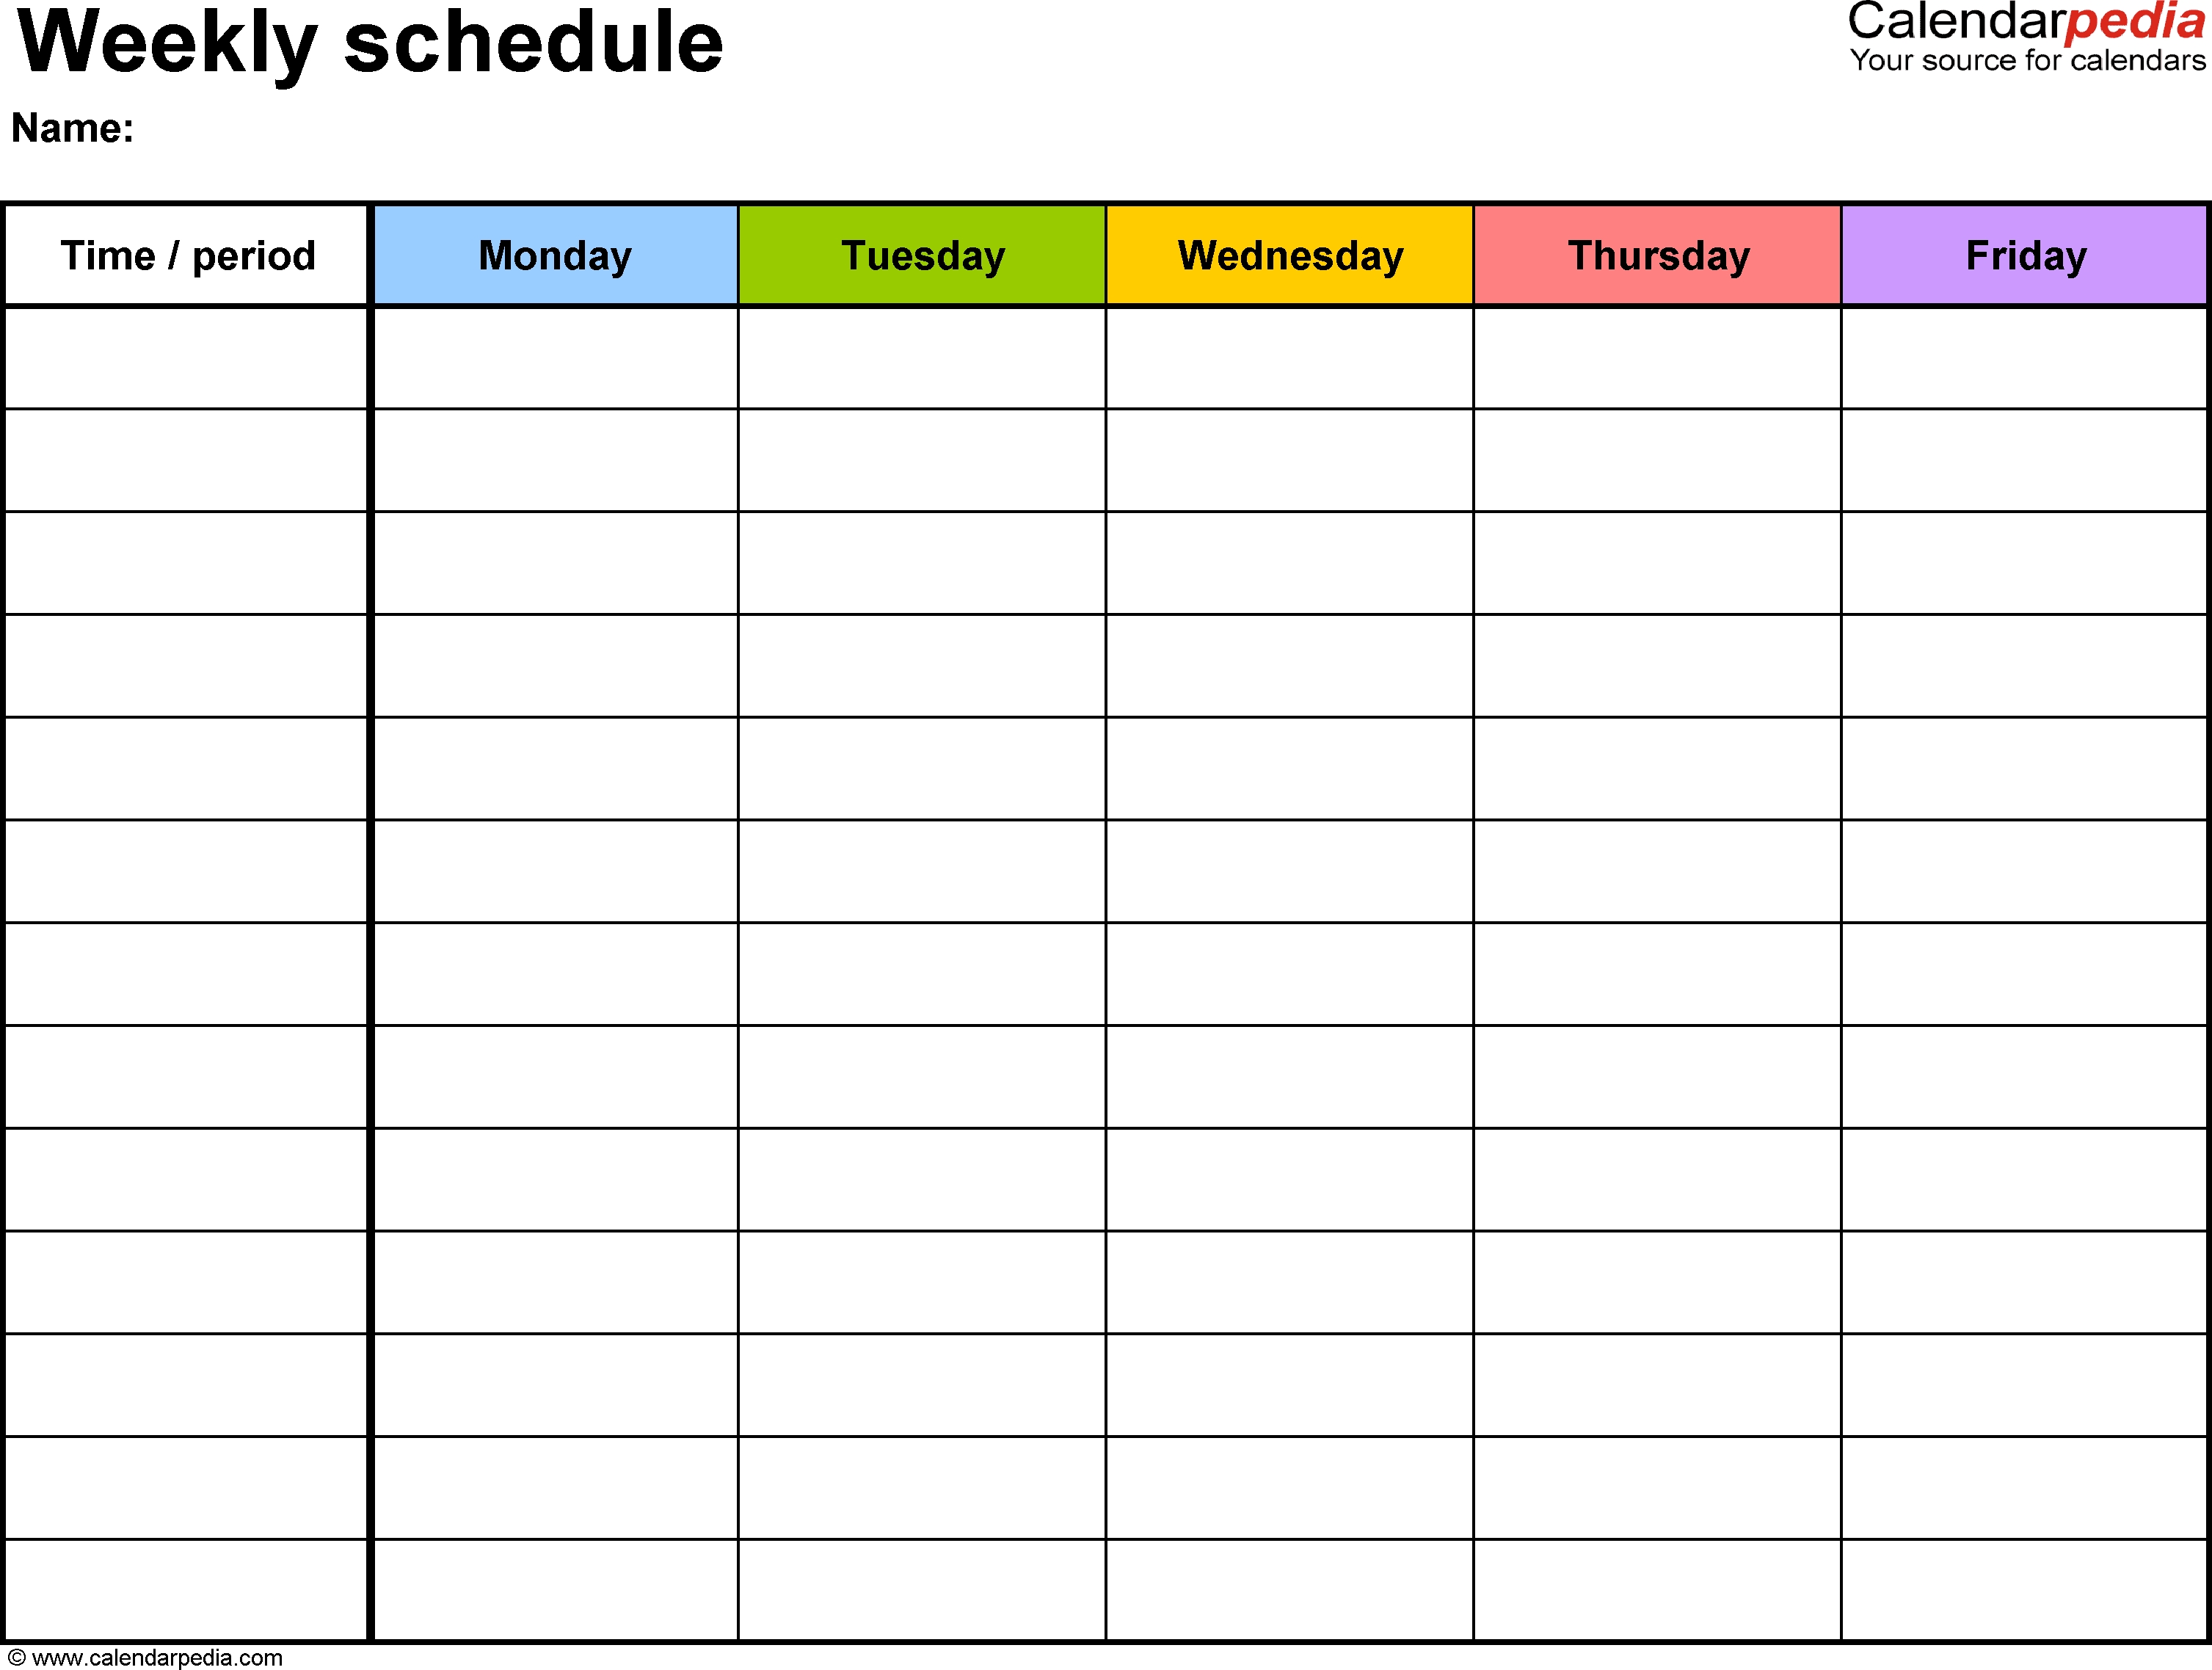 Free Weekly Schedule Templates For Excel - 18 Templates inside 5 Day Weekly Timetable Blank 6 Periods